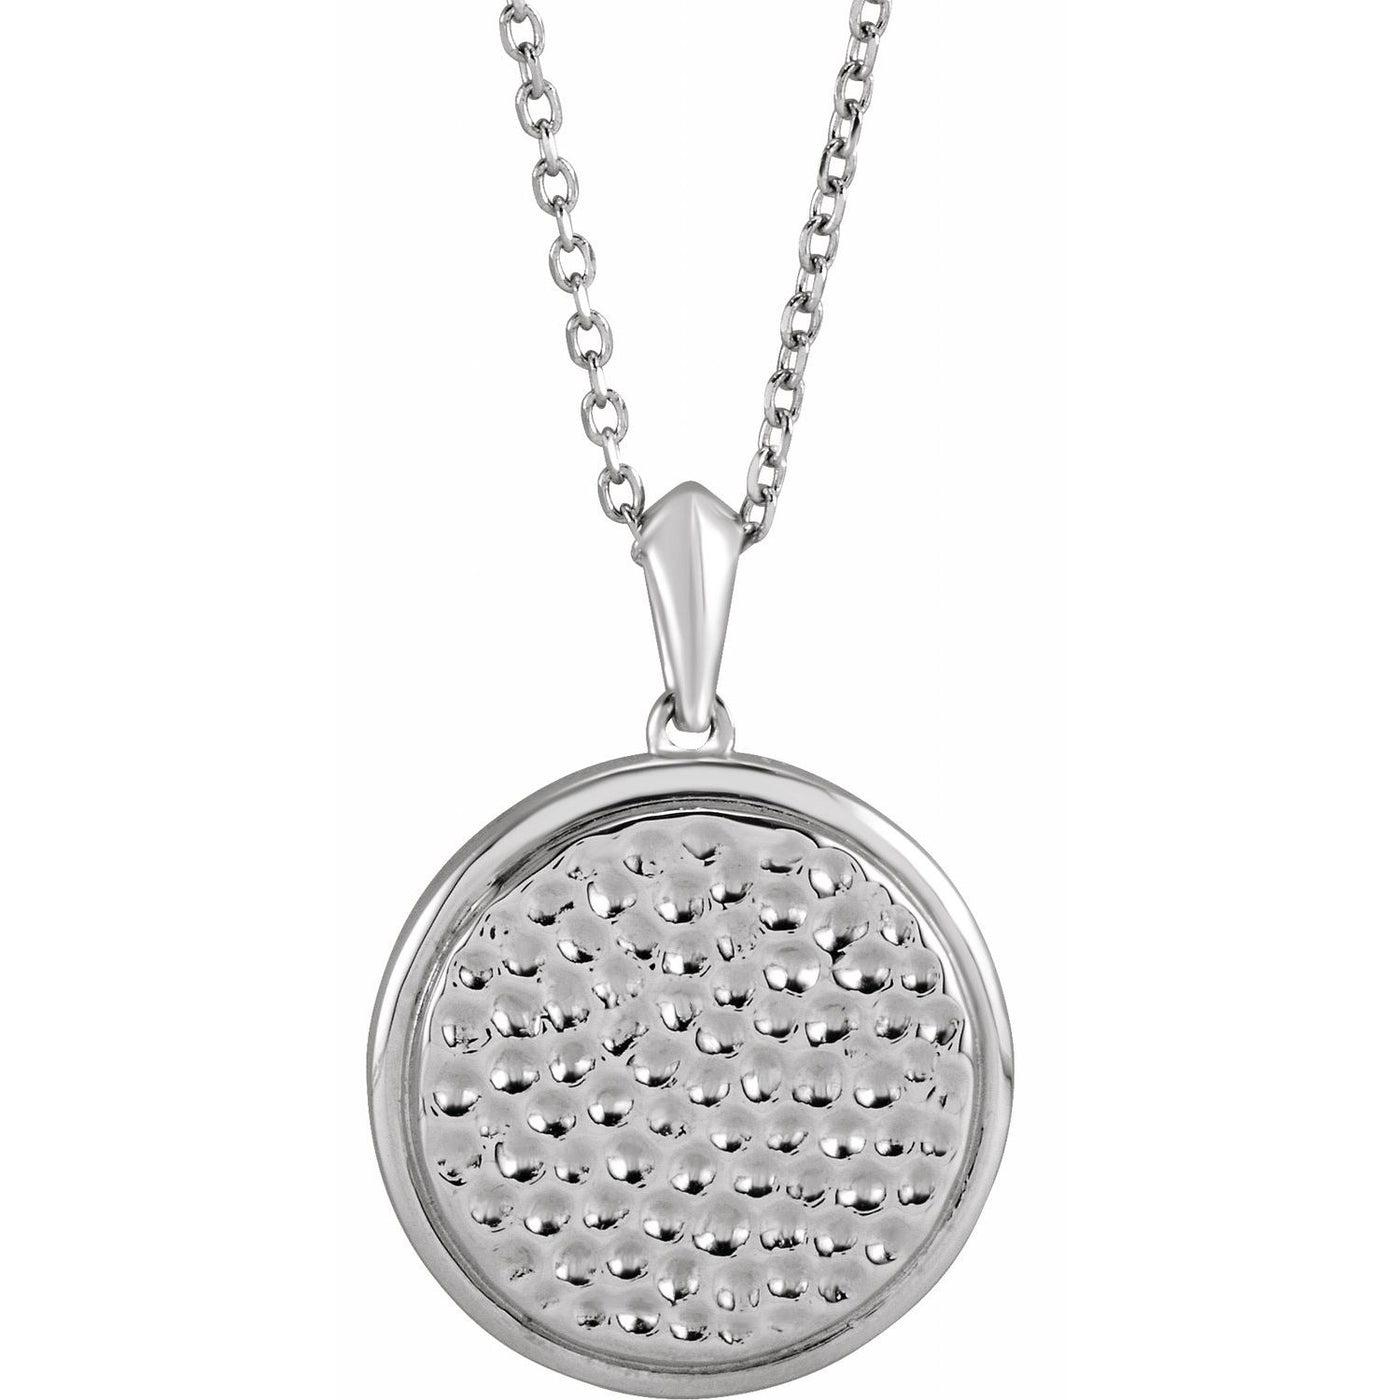 Sterling Silver Beaded Disc Pendant